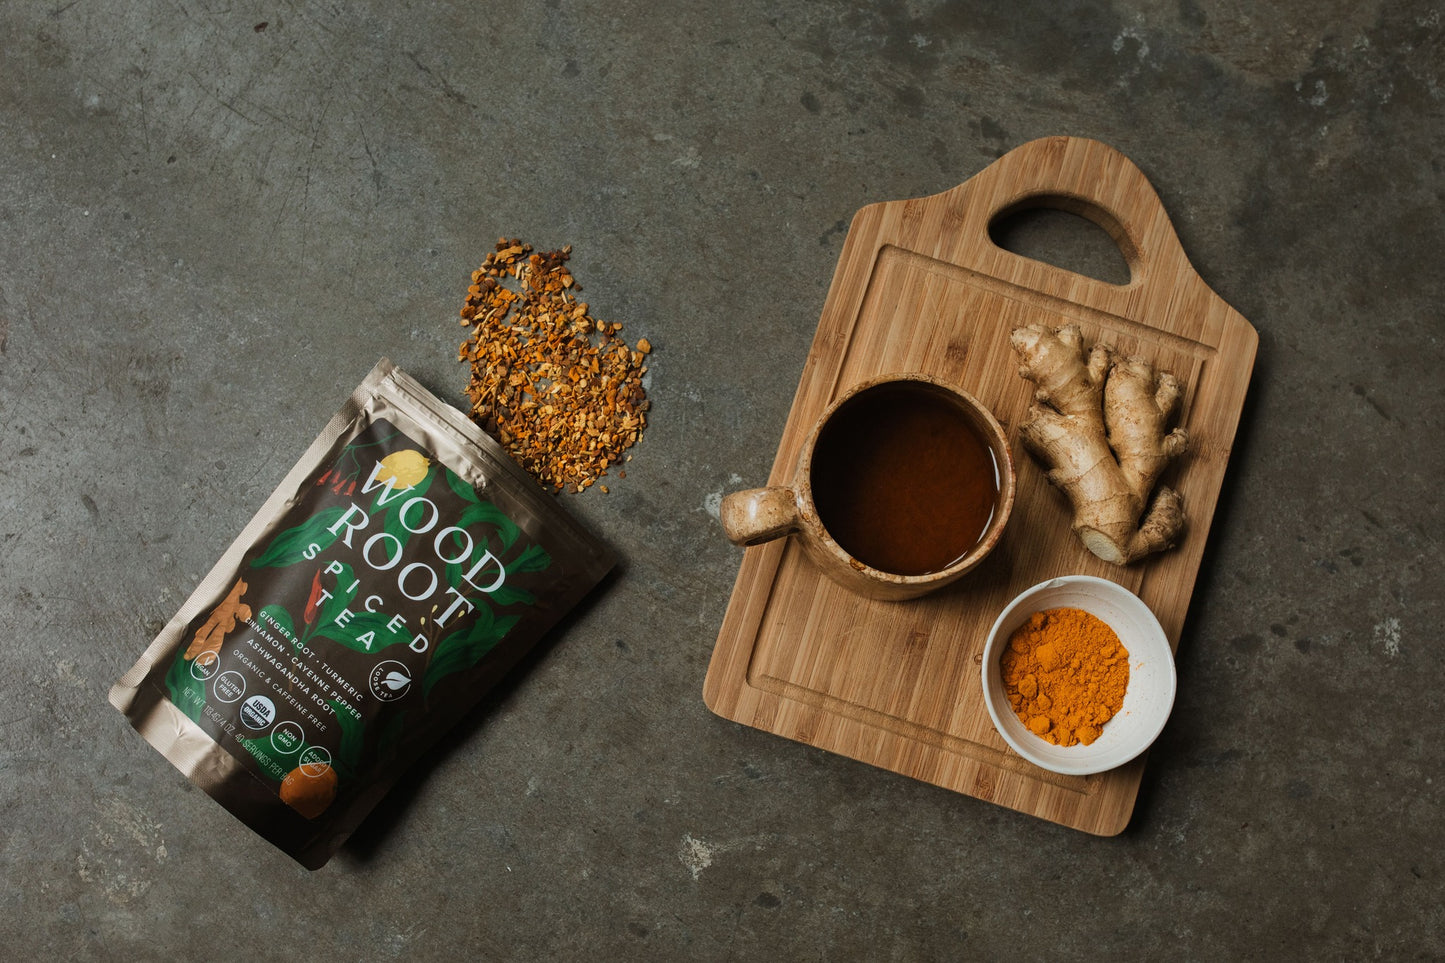 "A bag of Woodroot Spiced Tea with its contents spilled out beside a wooden cutting board, which holds a cup of brewed tea, fresh ginger, and a bowl of turmeric powder.